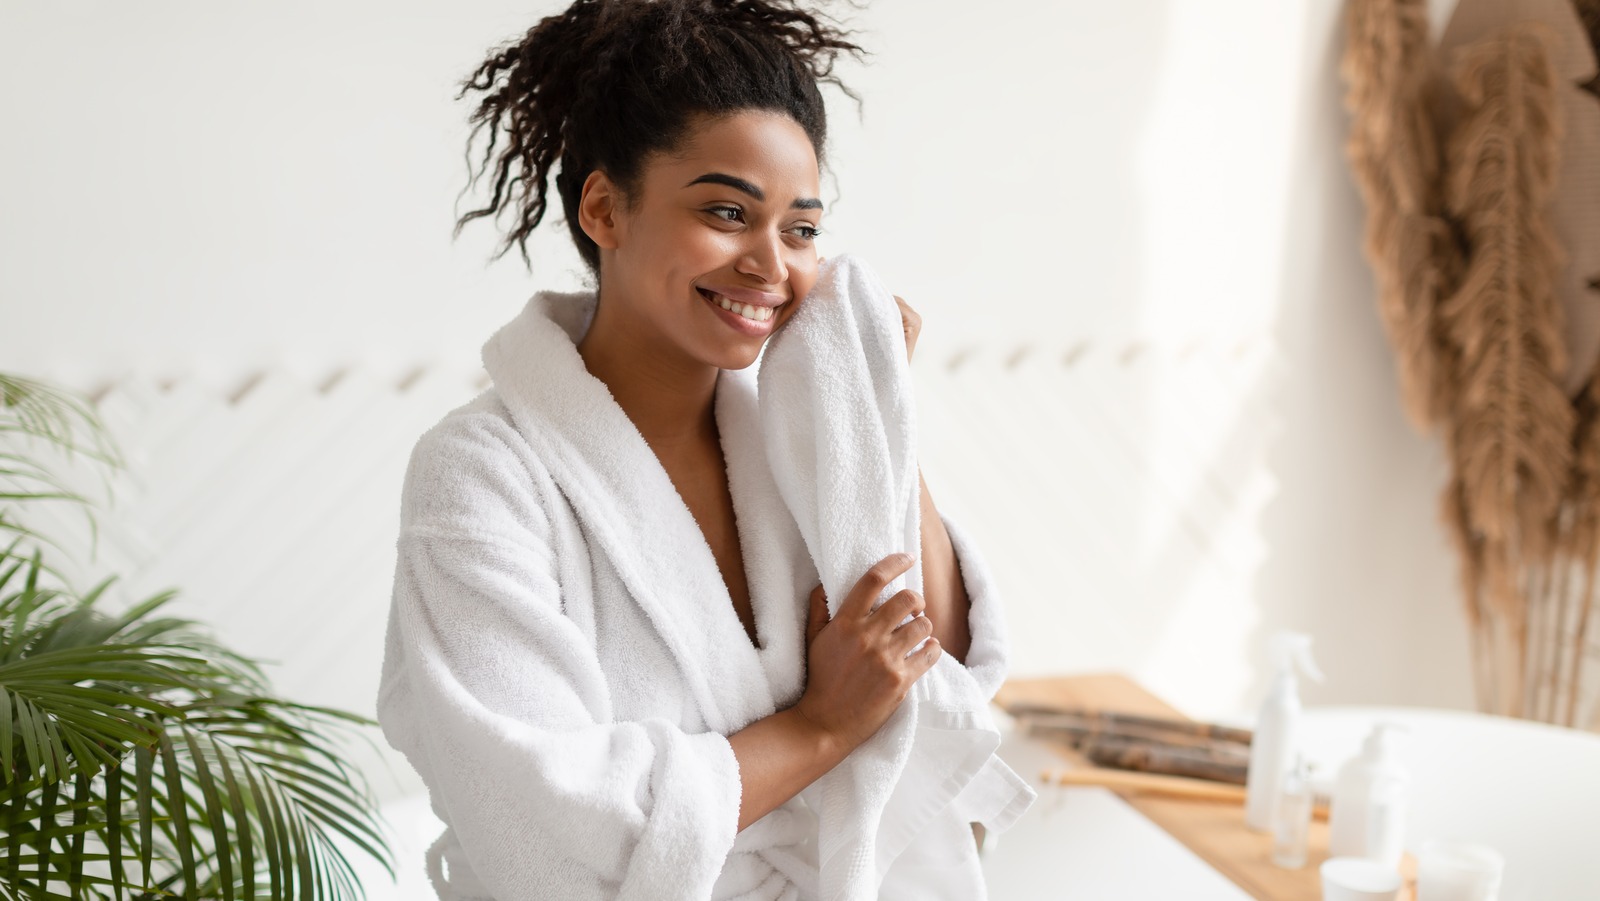 https://www.glam.com/img/gallery/your-post-shower-drying-off-technique-is-more-important-than-you-think-for-skin-health/l-intro-1683096550.jpg